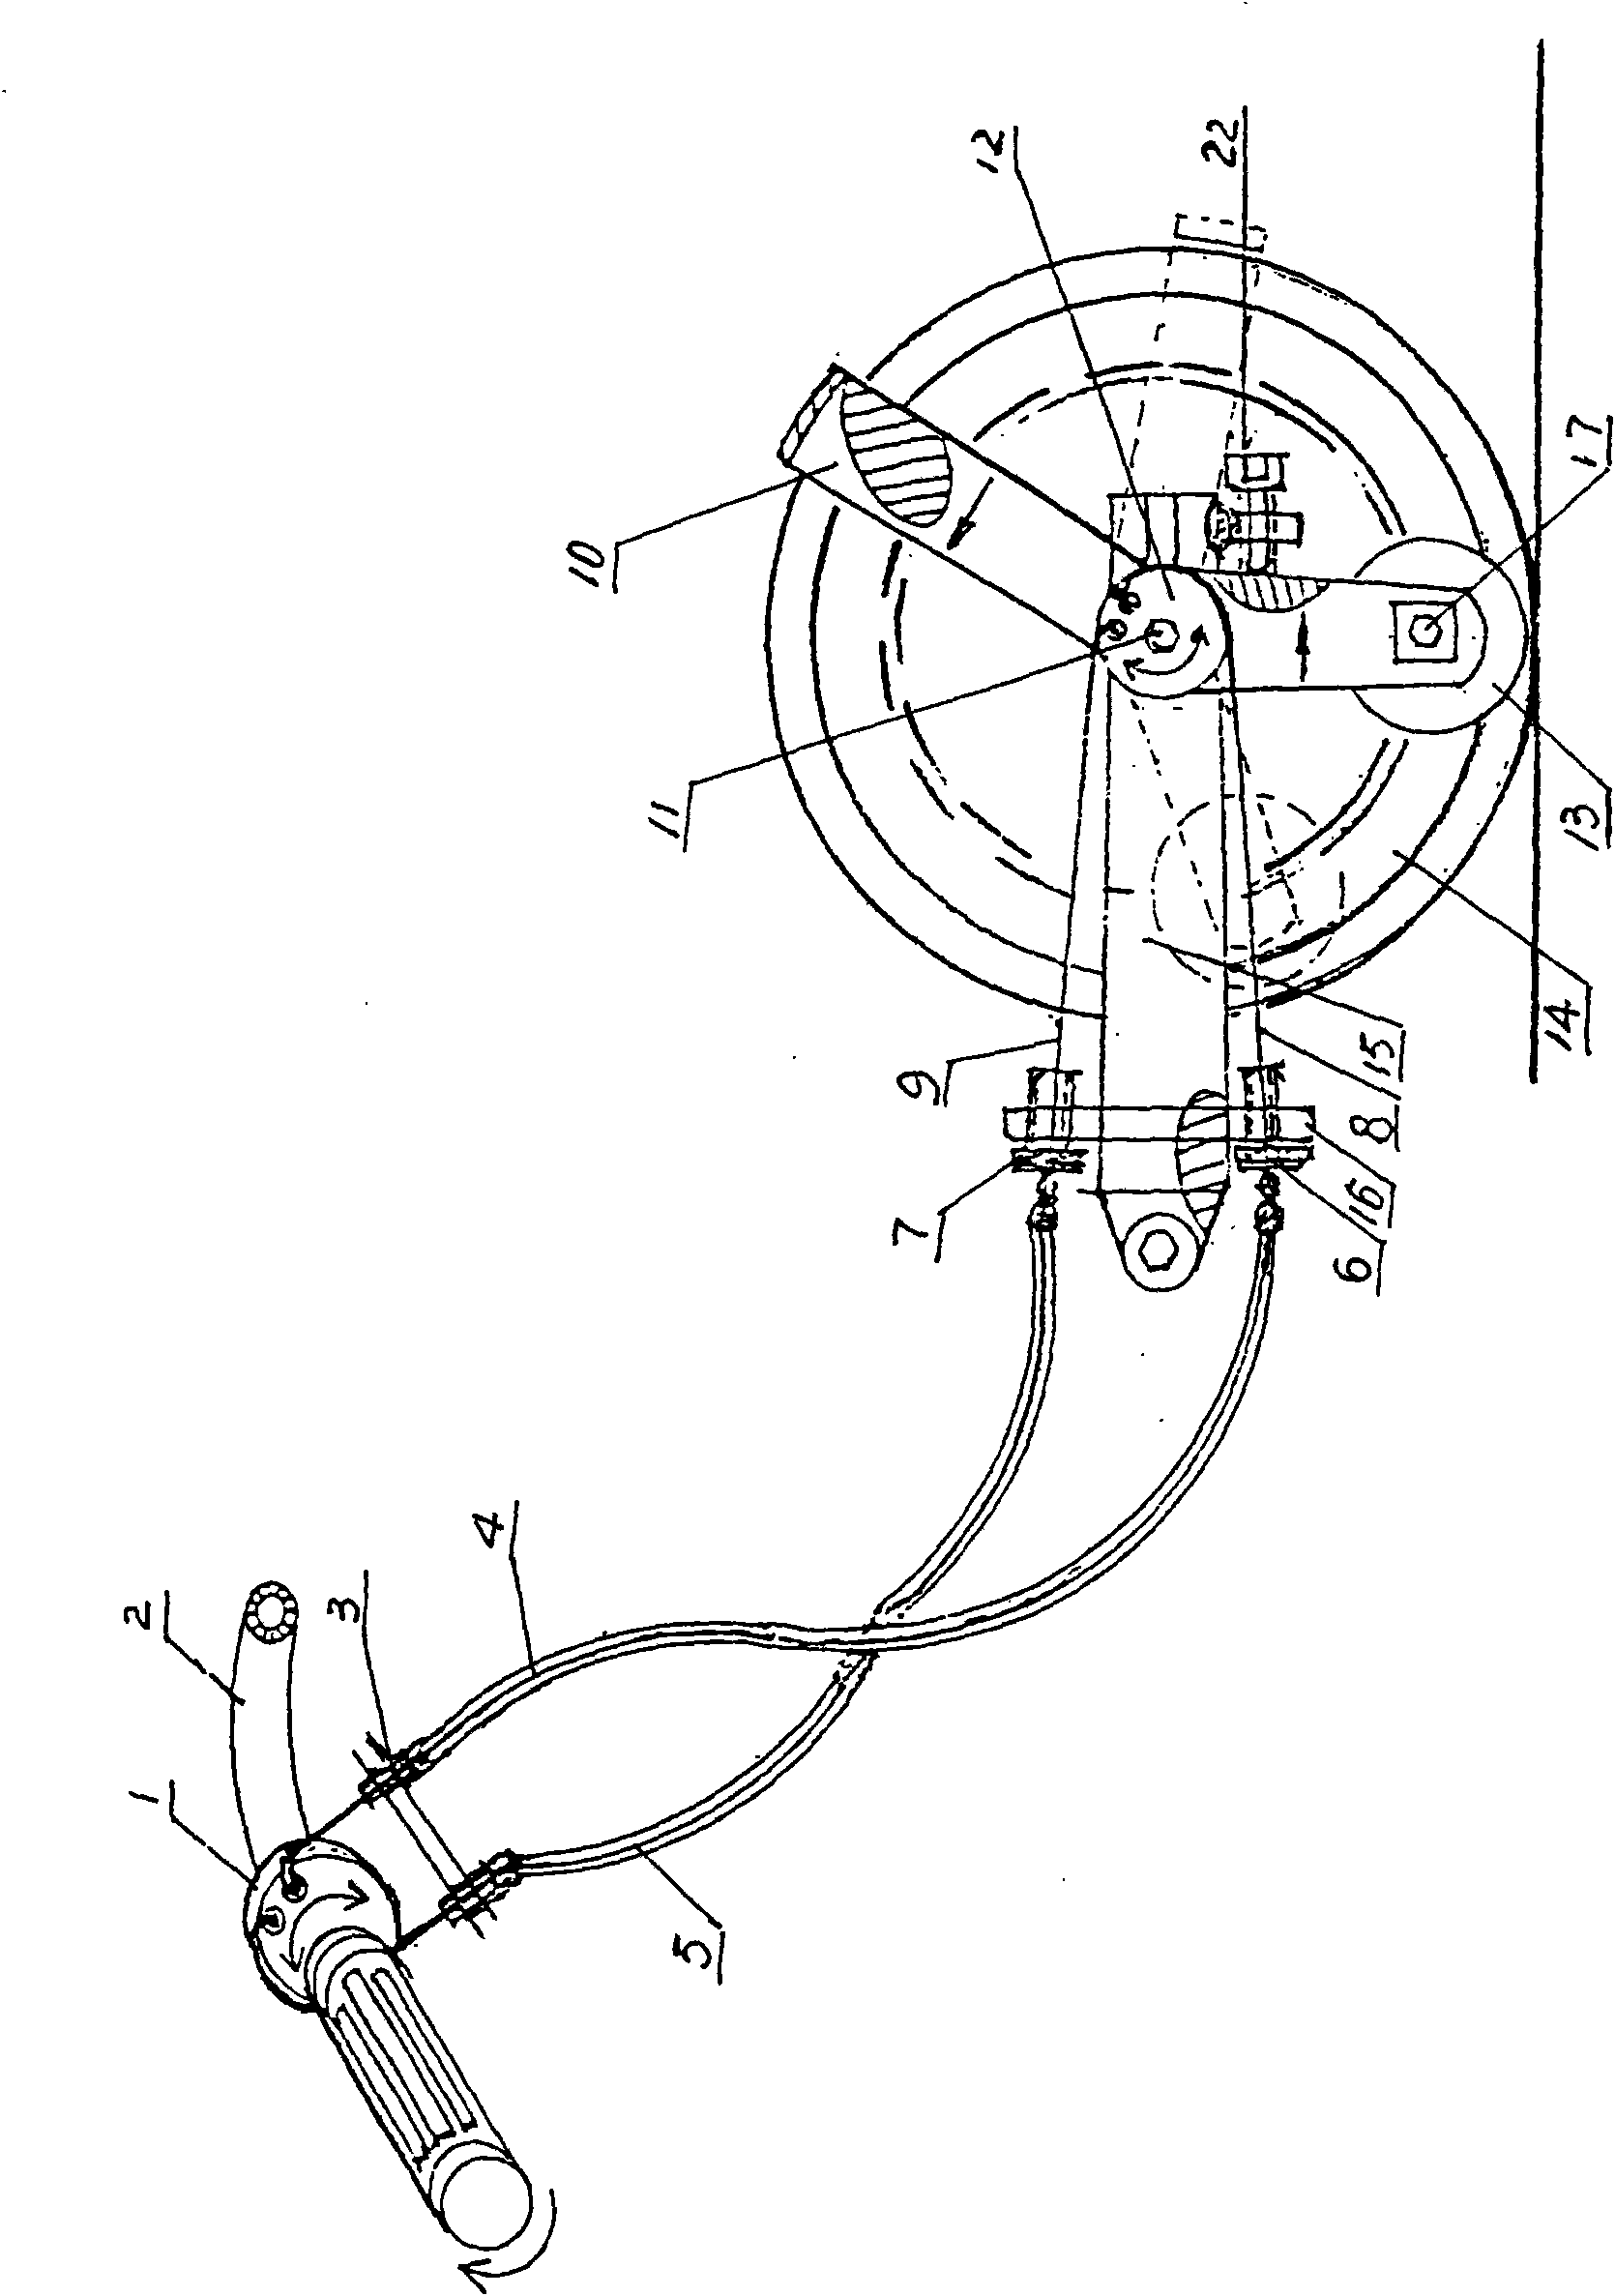 Manual fluctuation support device for vehicles